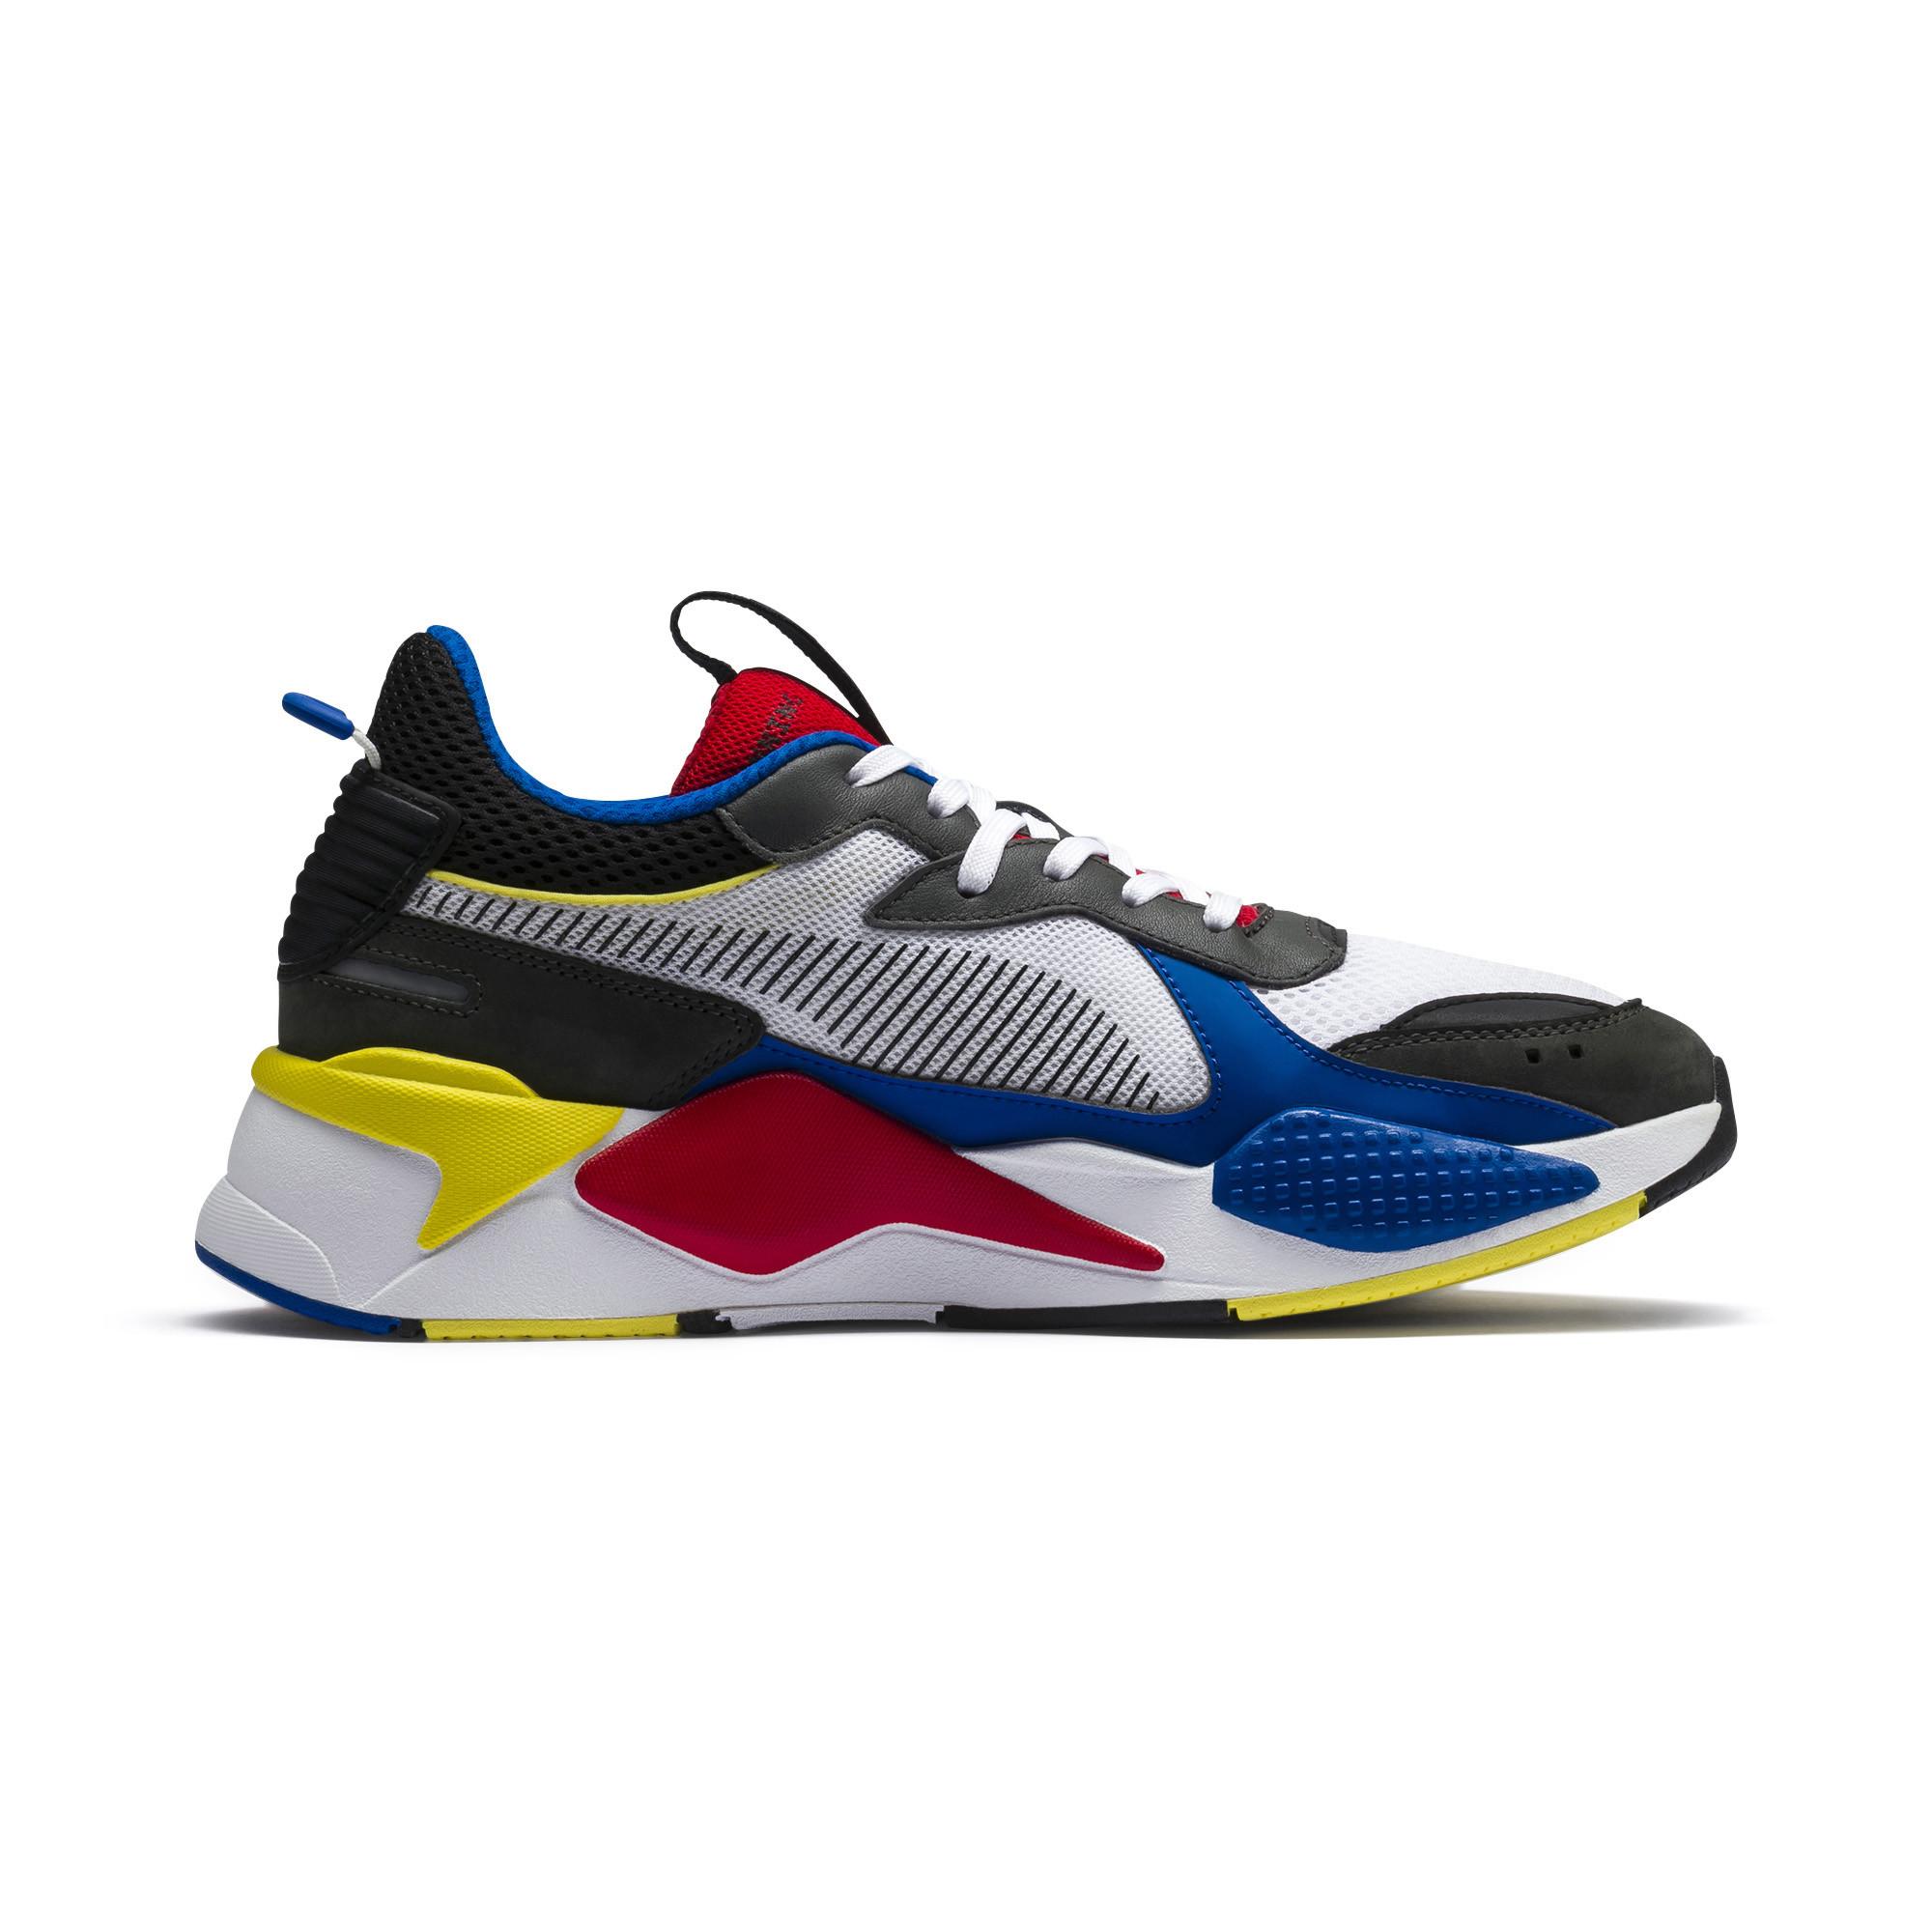 puma toy sneakers